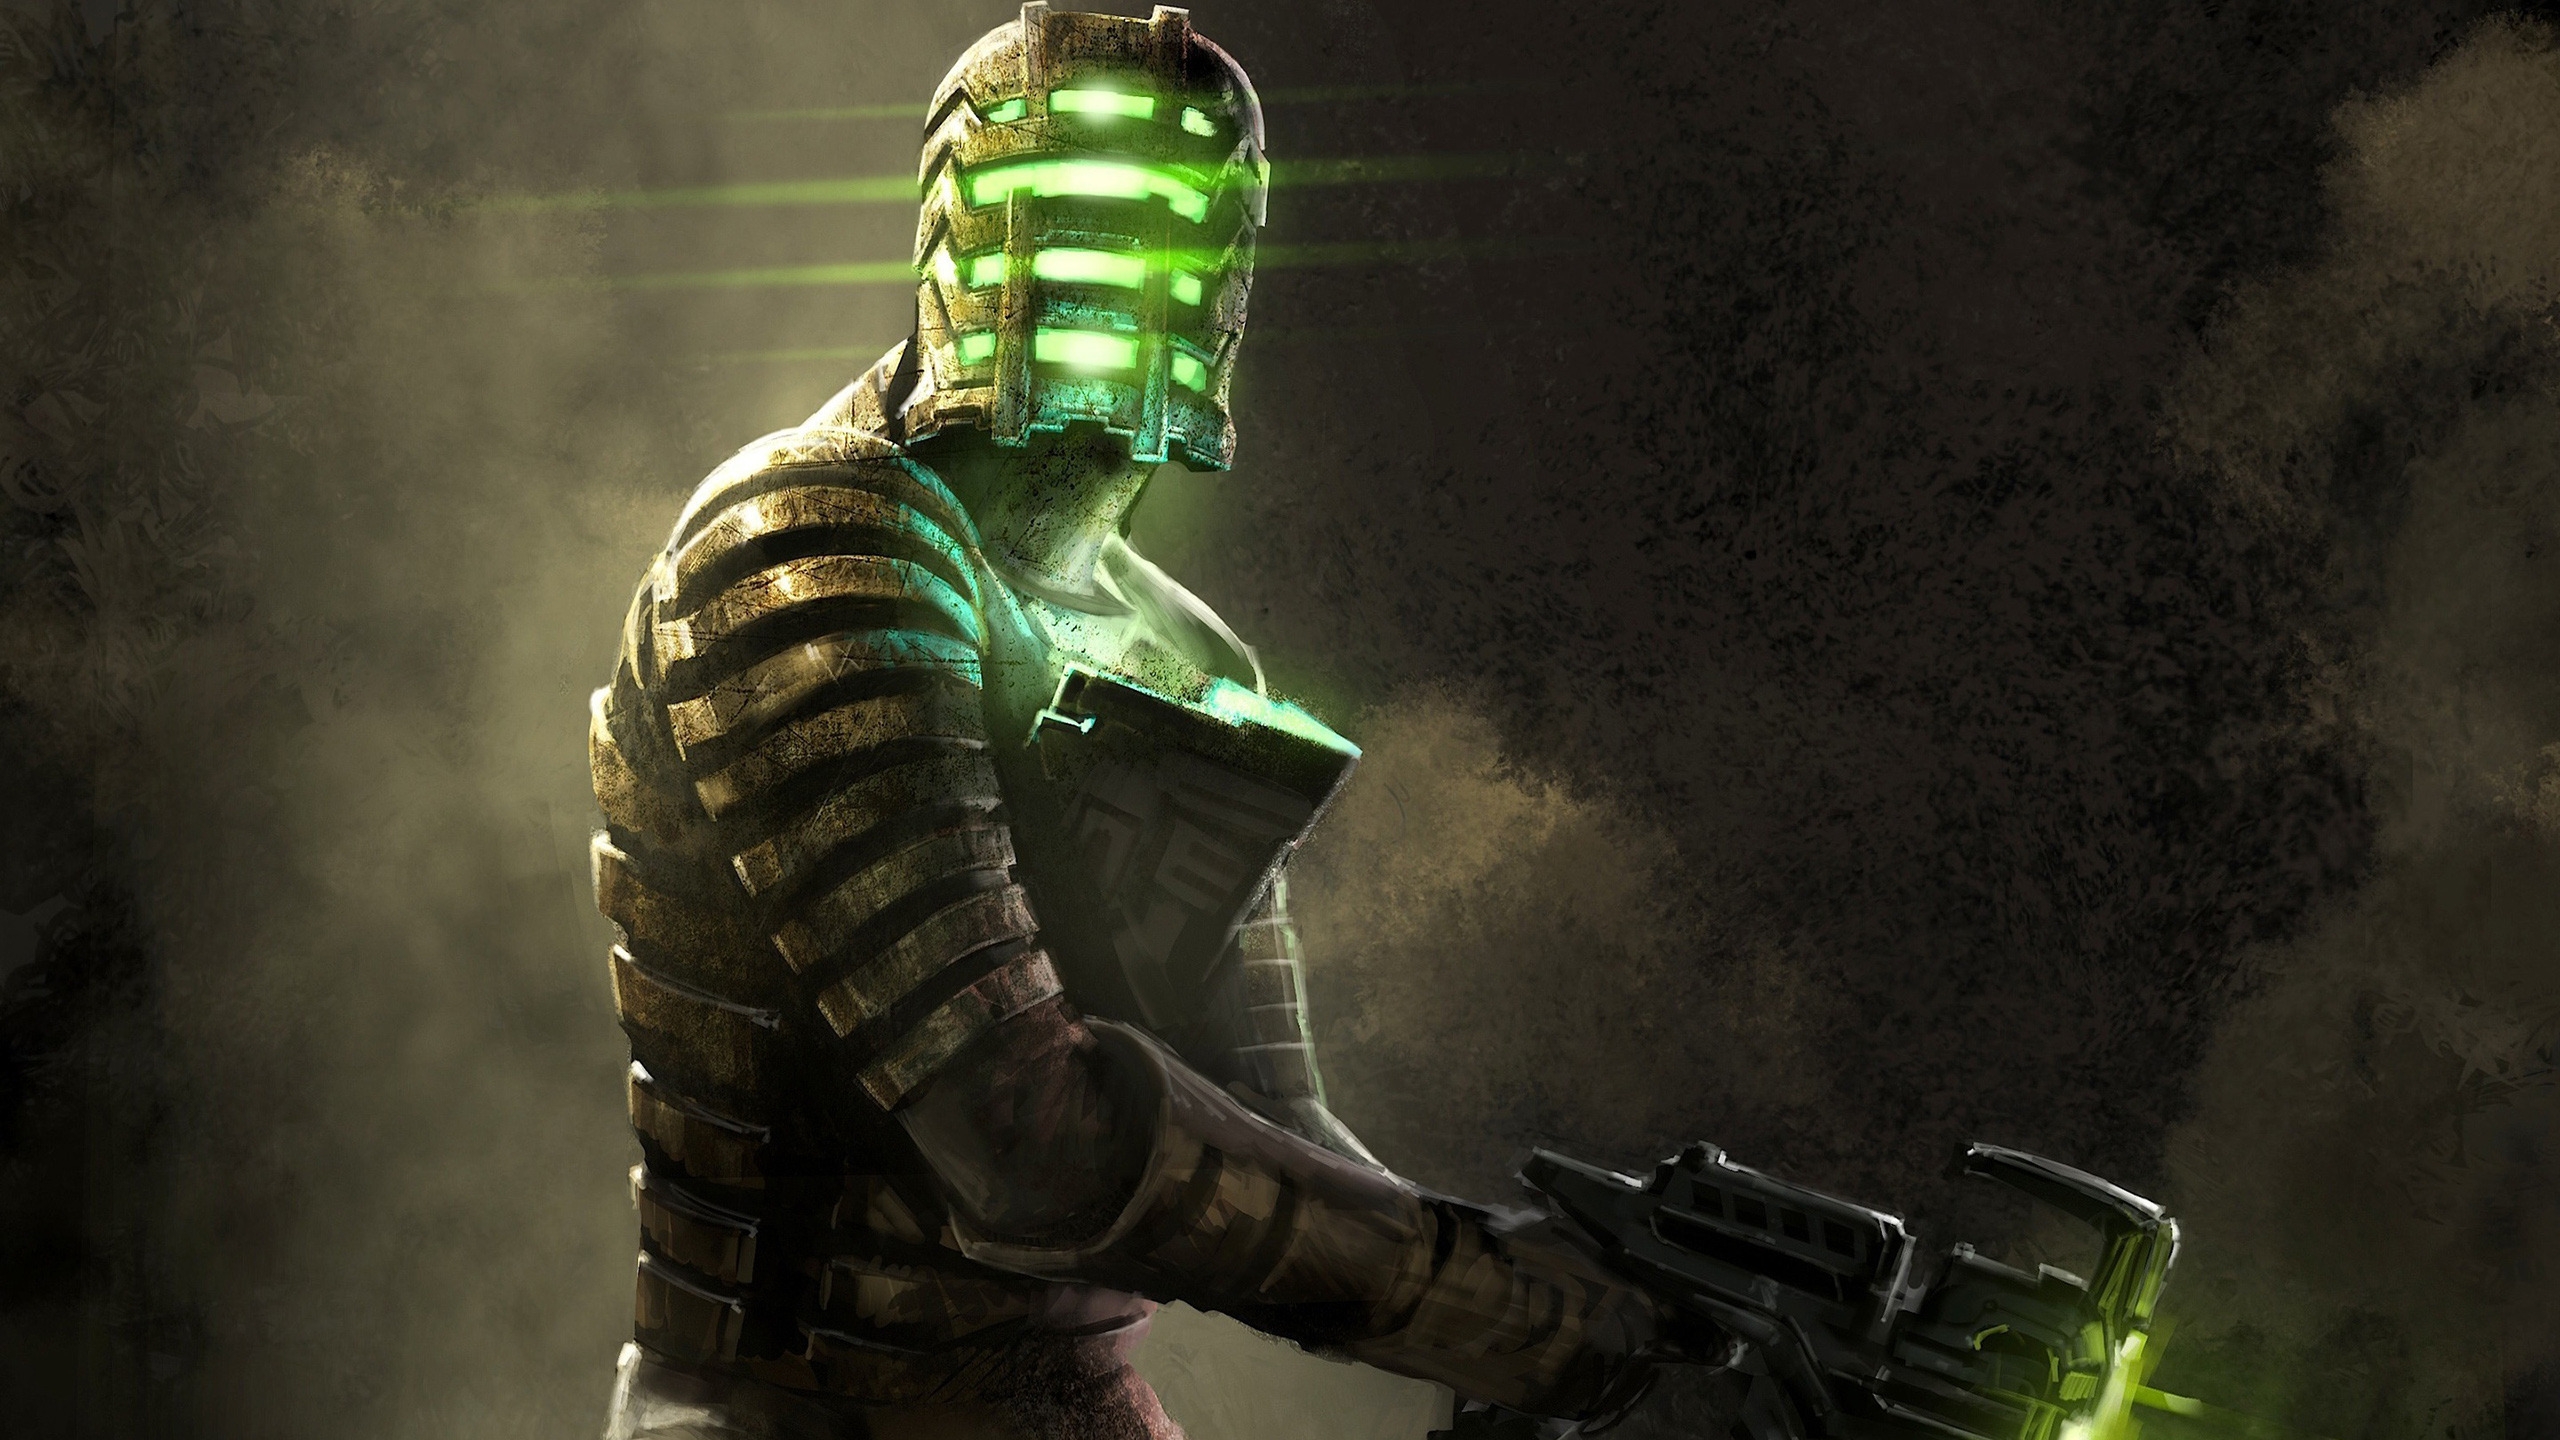 Green Dead Space for 2560x1440 HDTV resolution